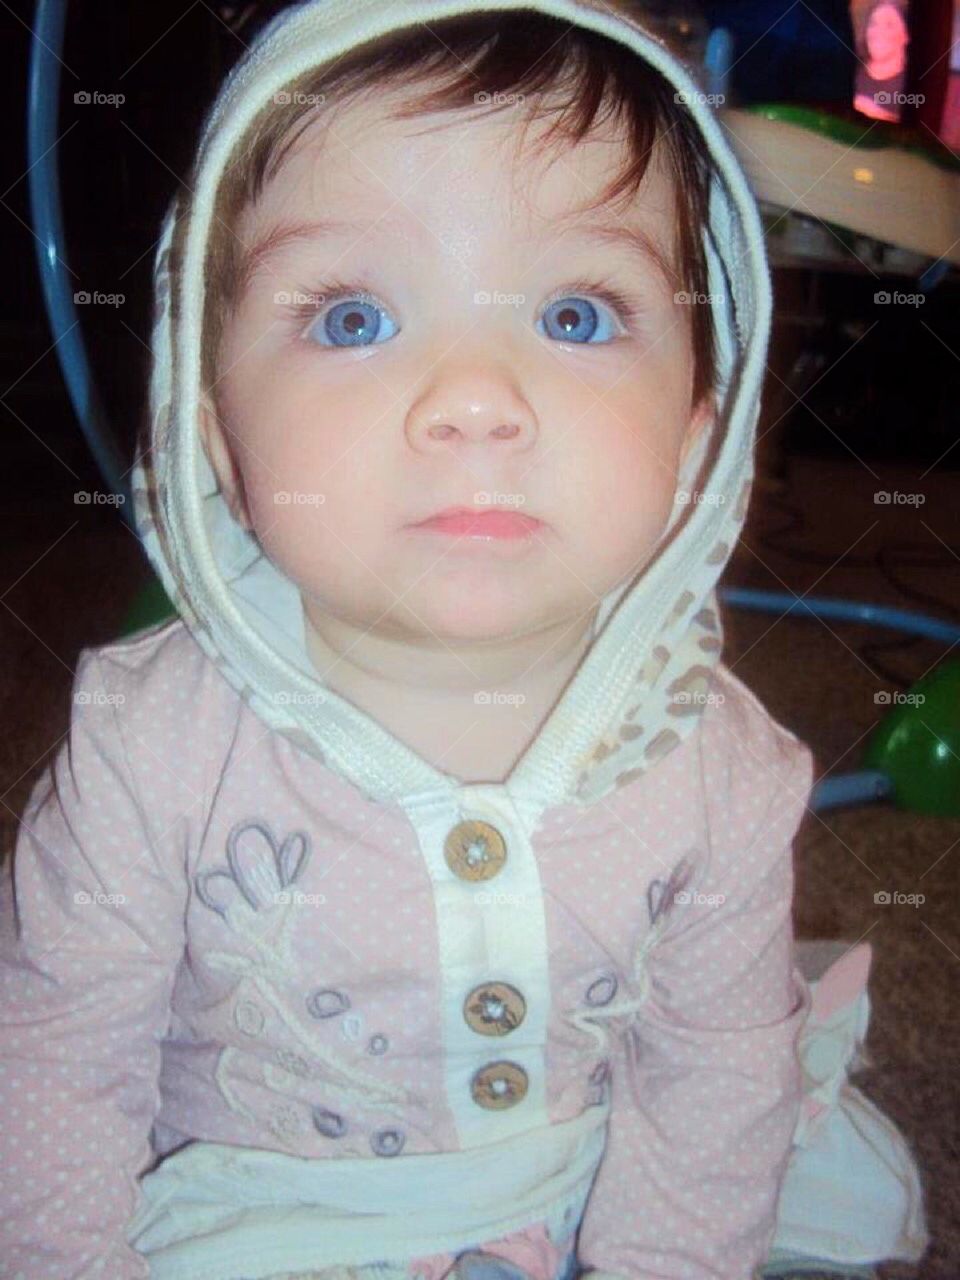 Baby with Big Blue Eyes